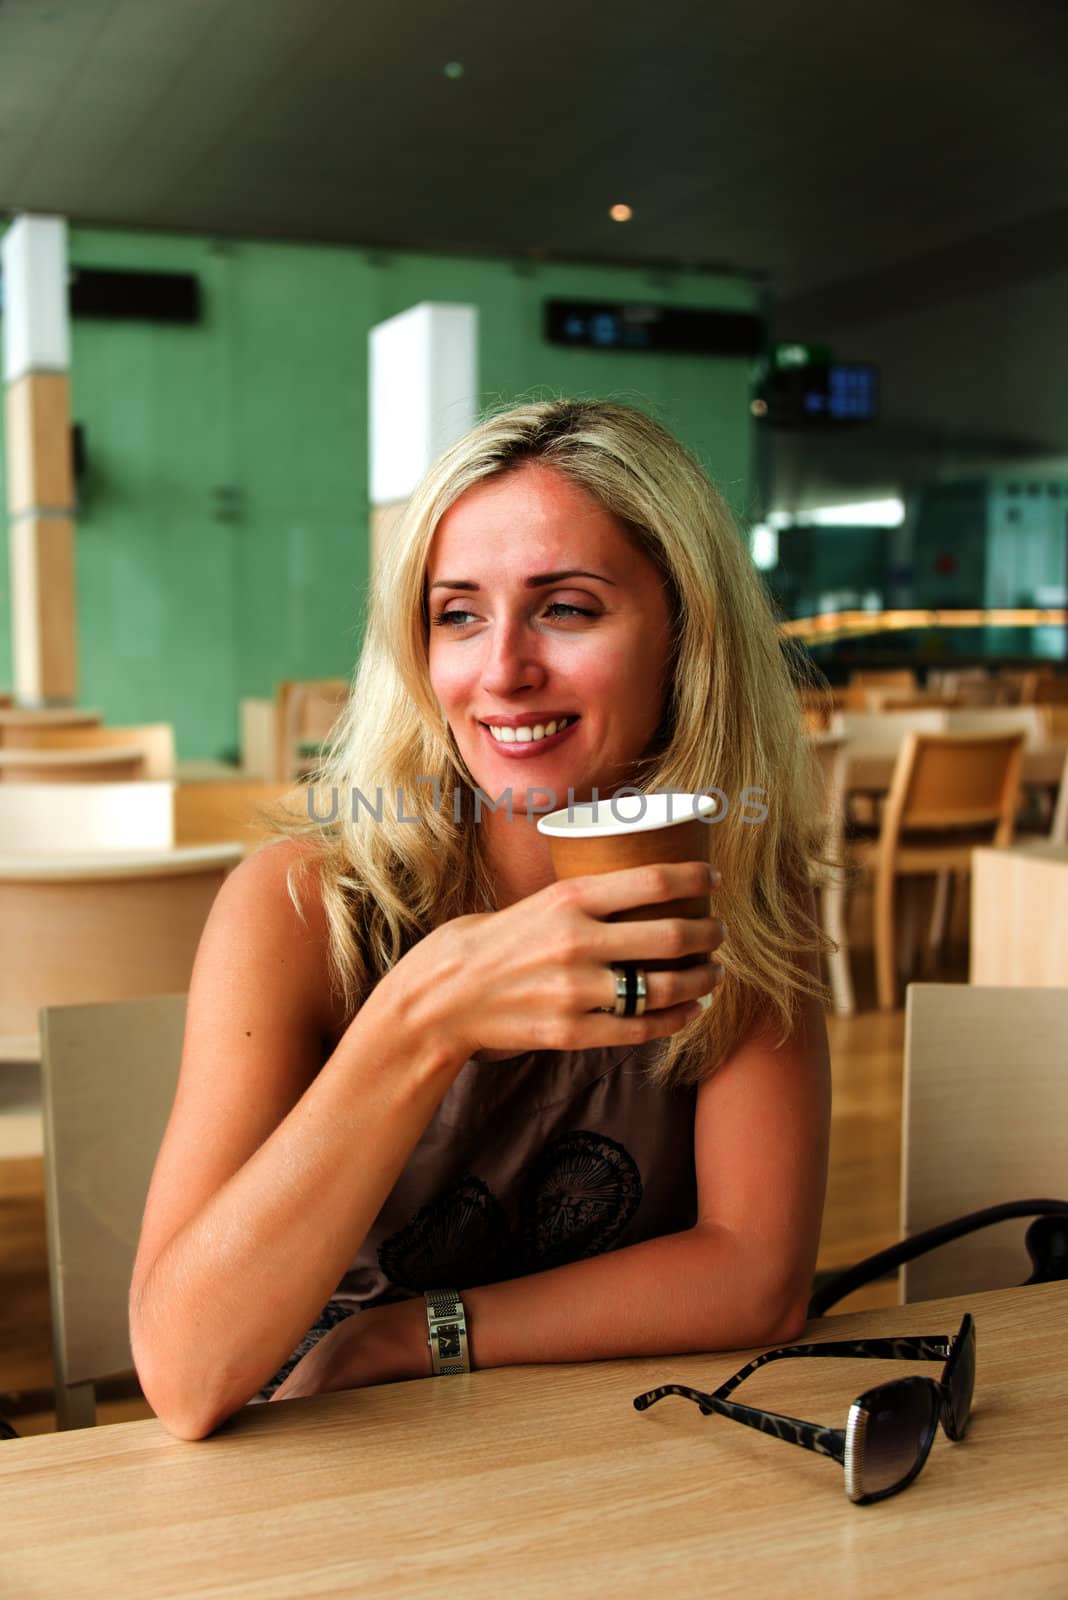 blond woman drinking coffee and smiling by Nanisimova